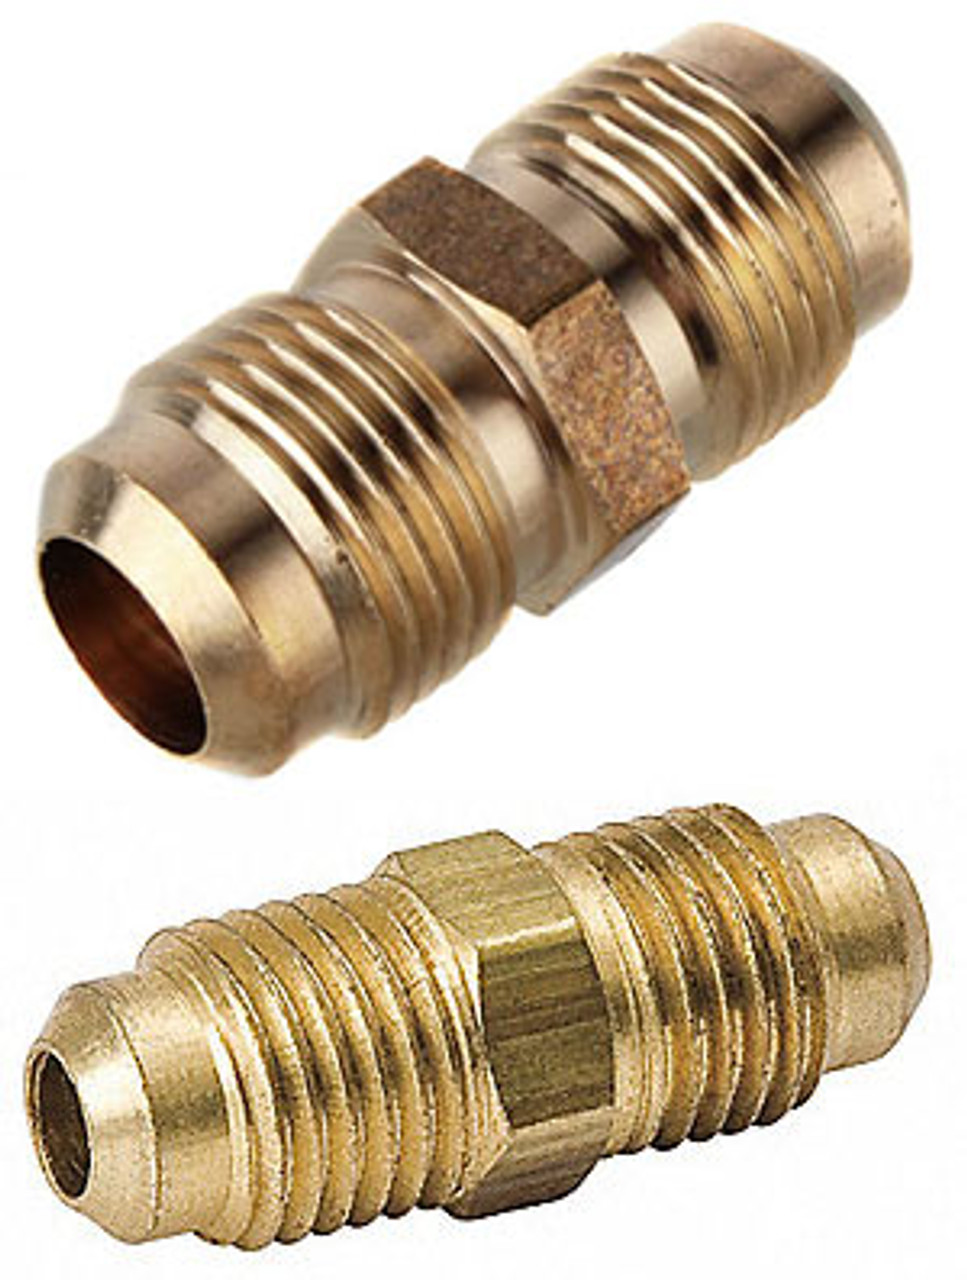 5x Brass Forged Flare Nut - 1/2 1/4 3/4 3/8 Nuts, A/C & Pipe